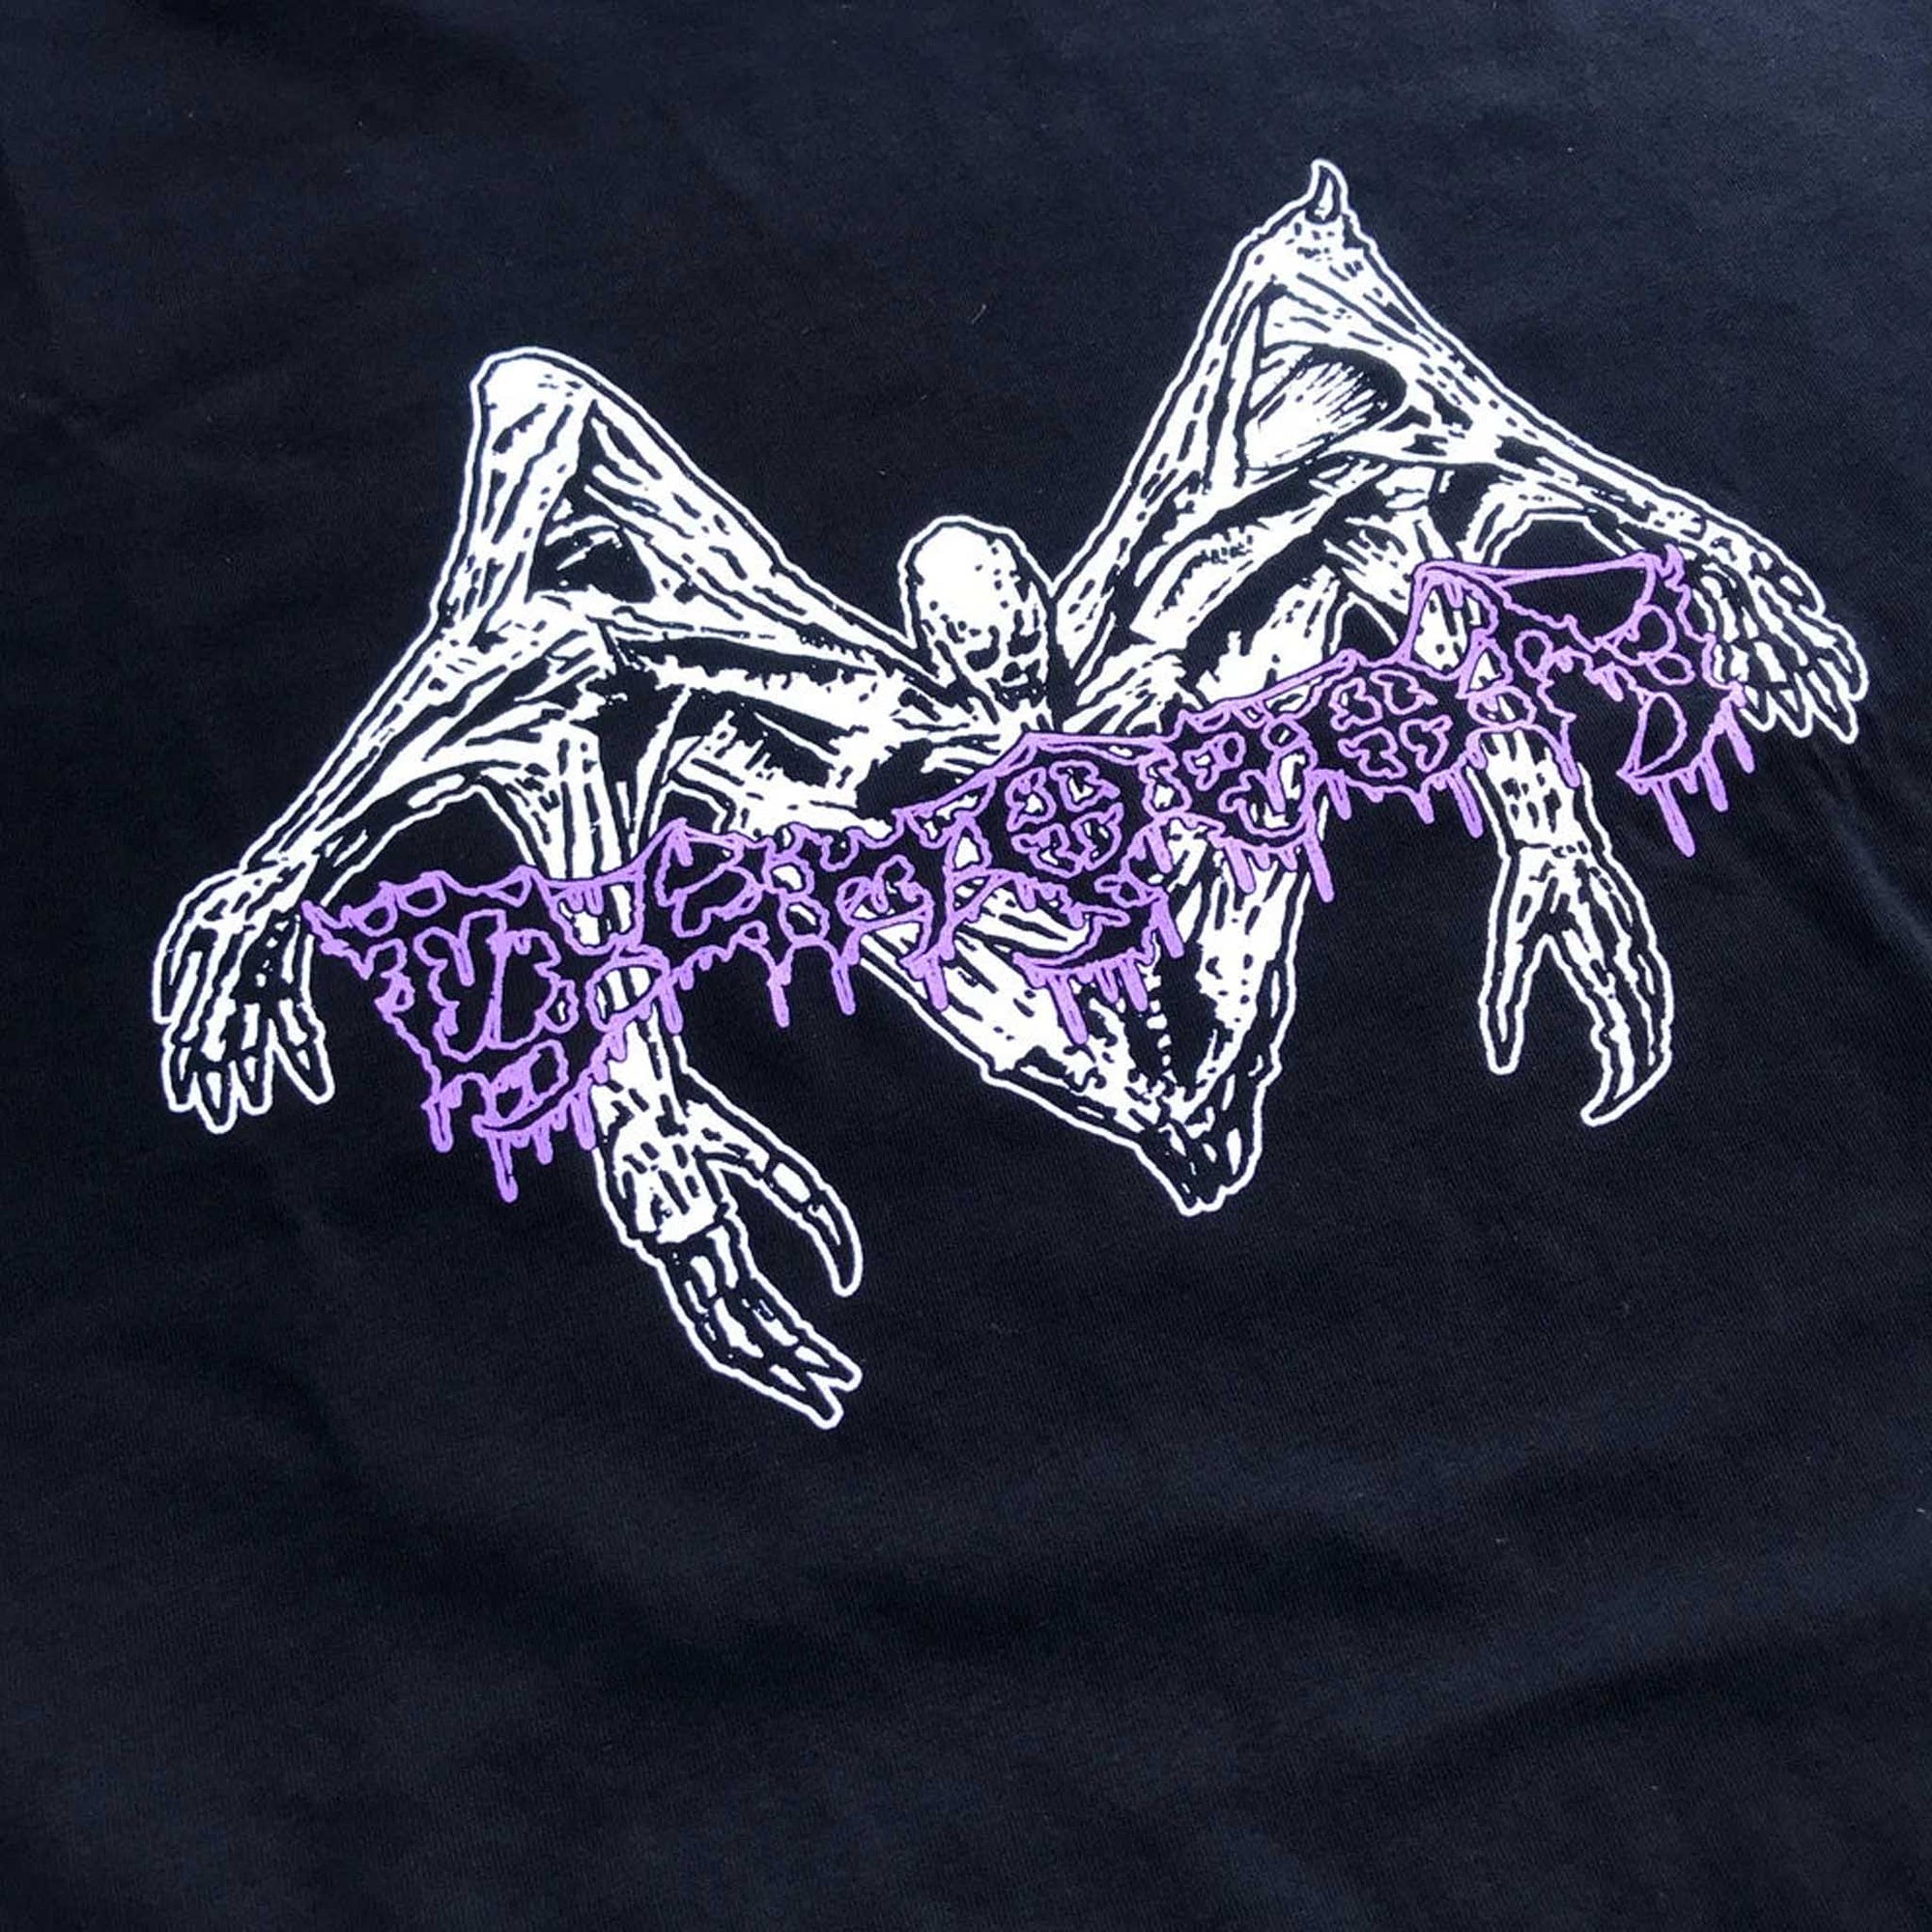 Dungeon - Wings Of Death T-Shirt - Black